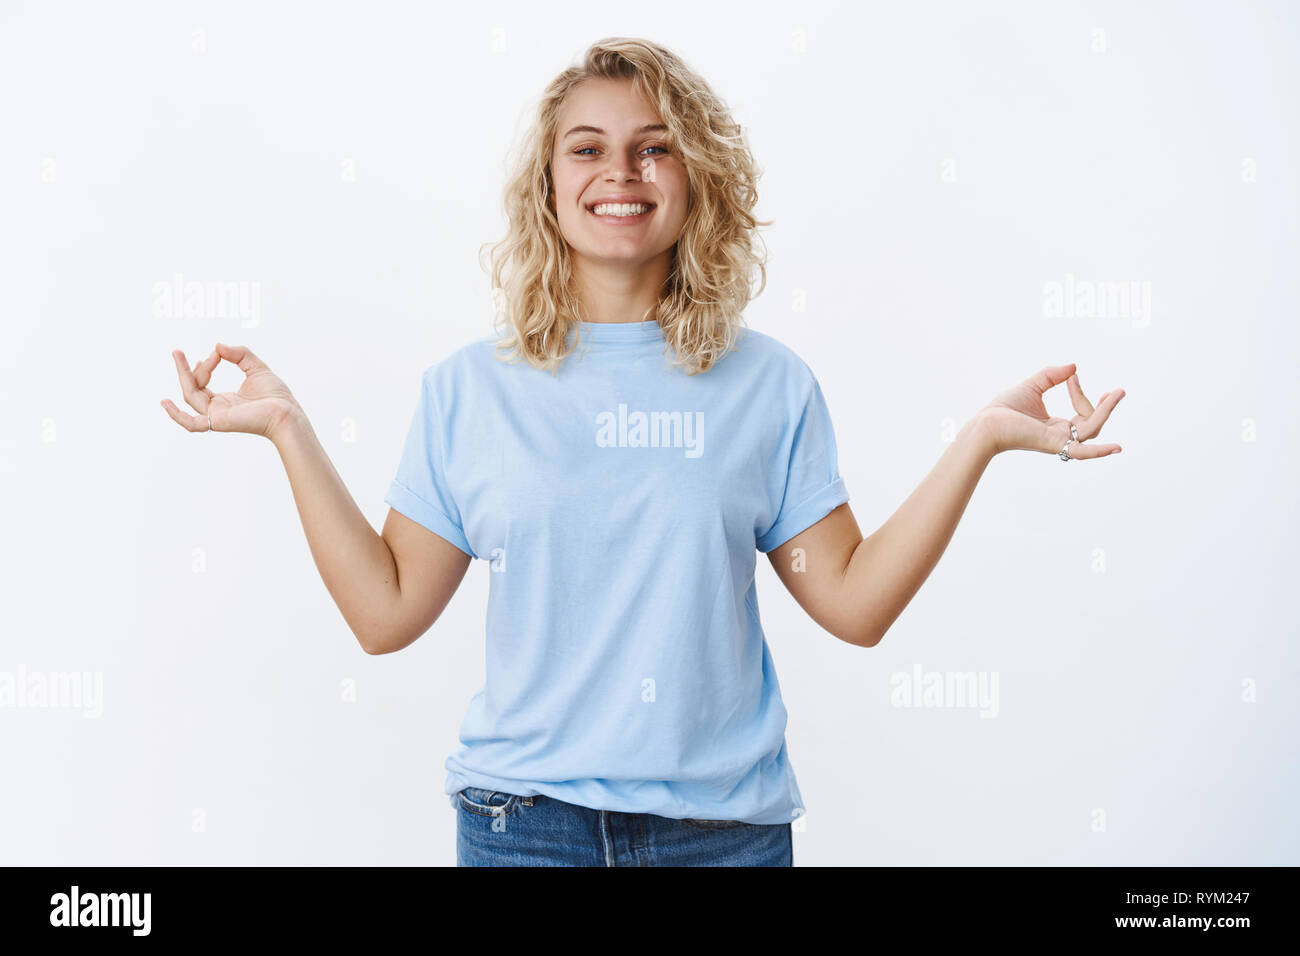 Keep calm and carry on. Portrait of optimistic relieved and stress-free good-looking female with blond hair smiling pleased and relaxed, standing in Stock Photo